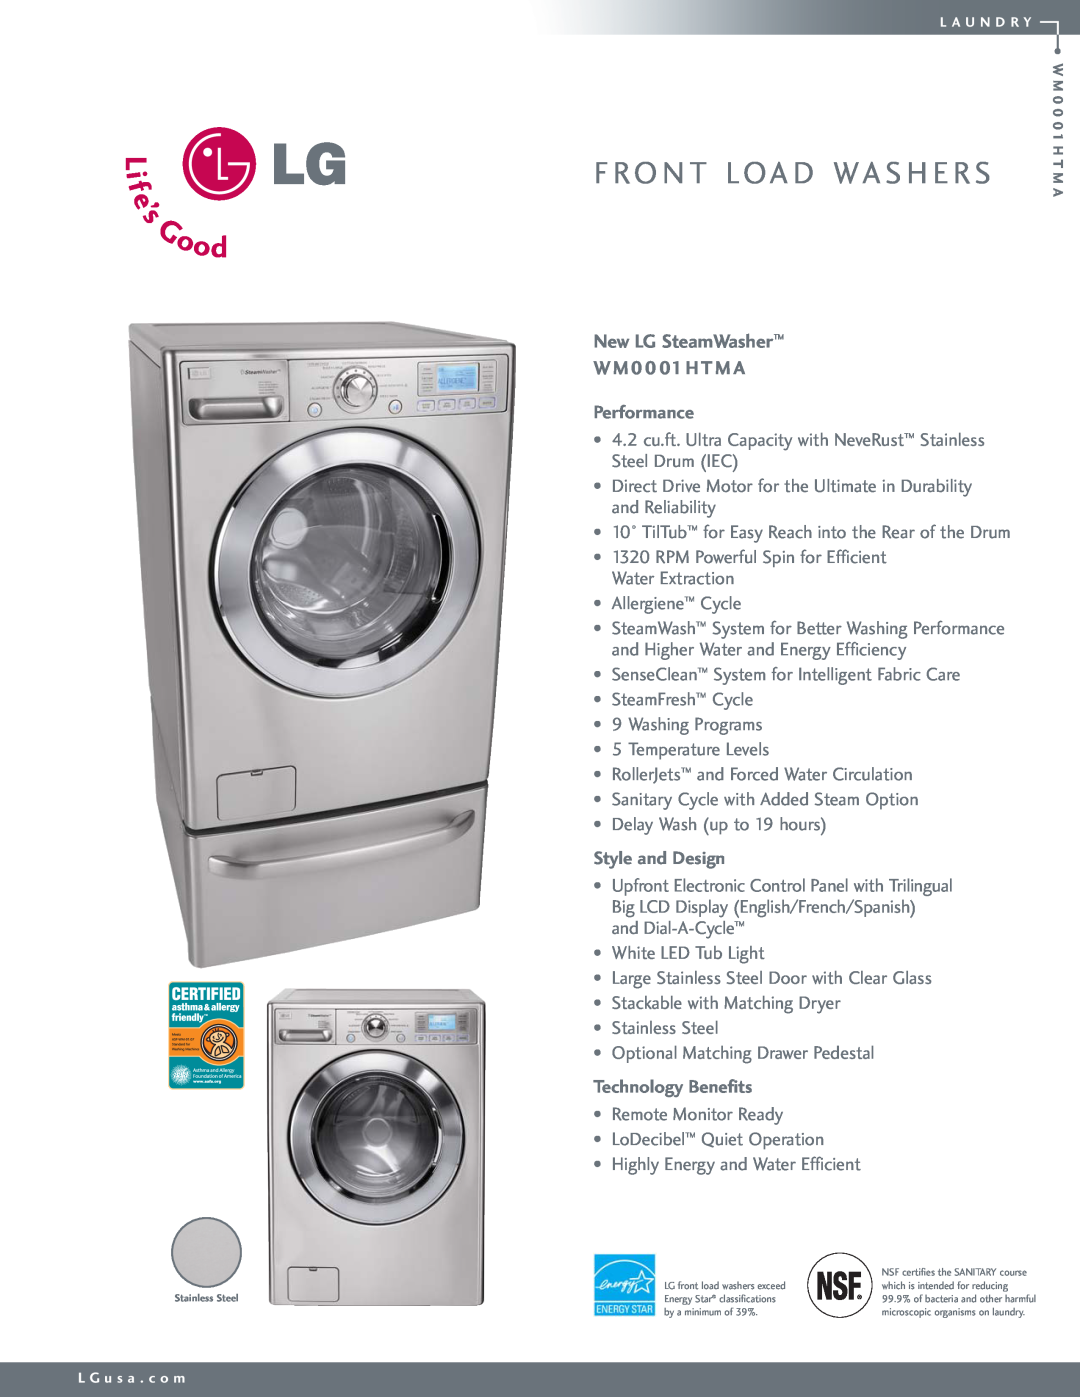 Goldstar manual F Ro N T Loa D Wa S H E R S, New LG SteamWasher WM0001HTMA, Performance, Style and Design 